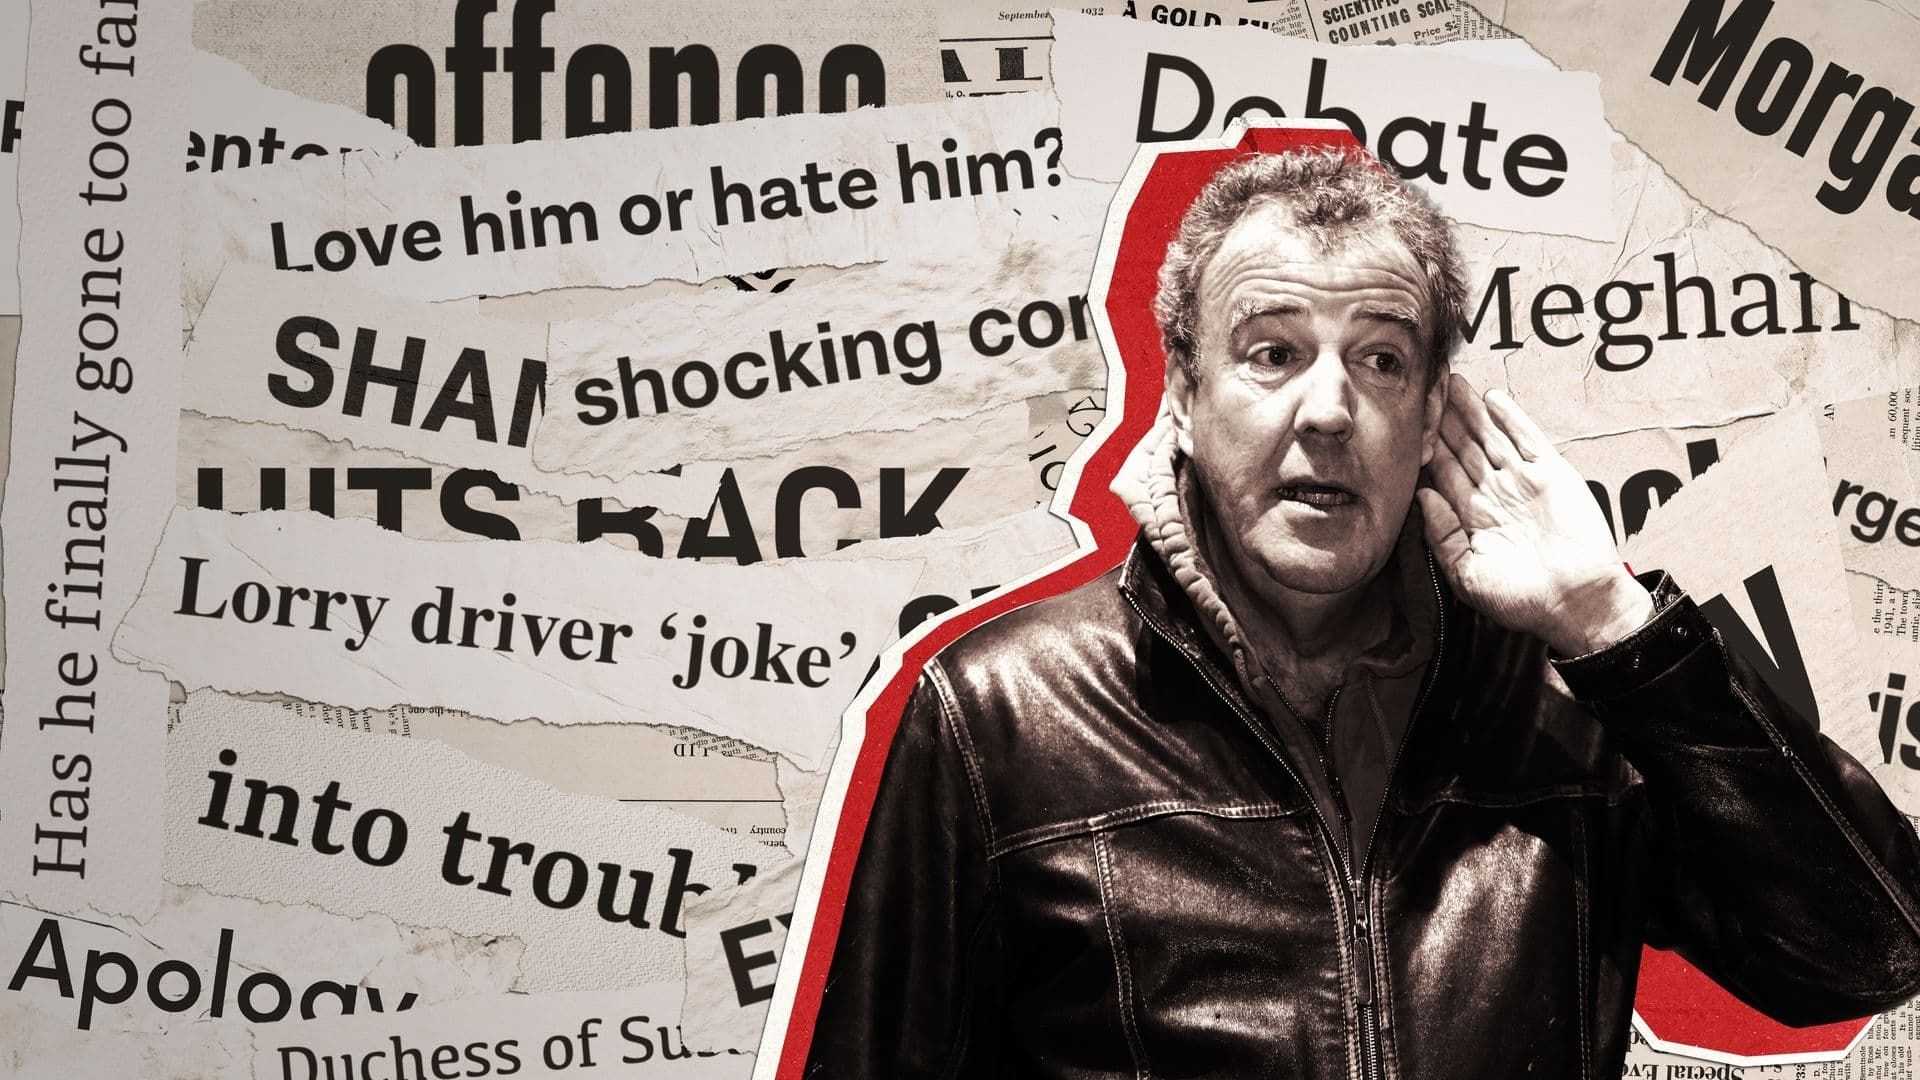 Jeremy Clarkson: King of Controversy background